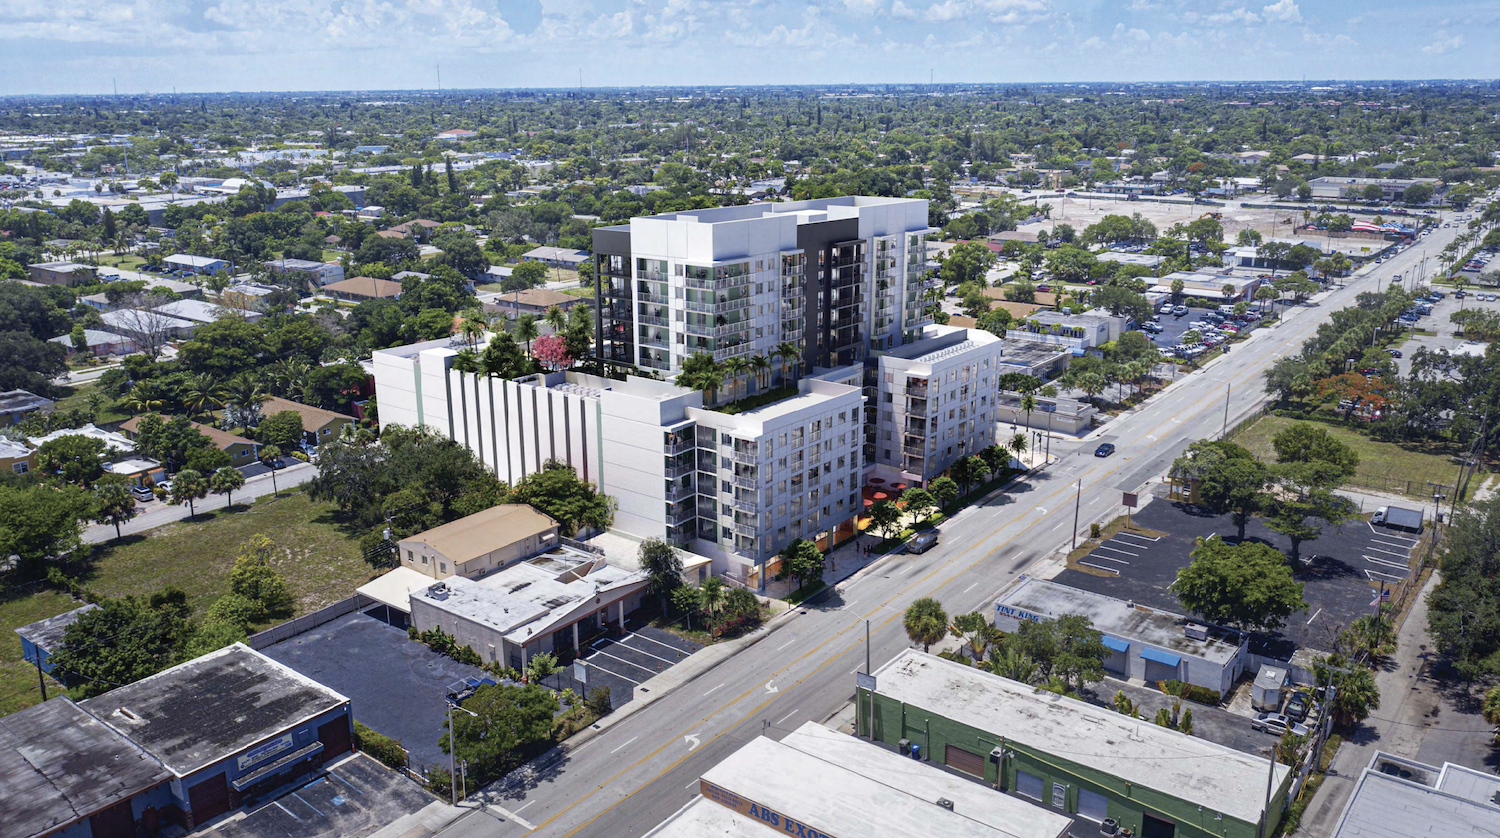 Aerial View - 745 North Andrews Avenue. Credit: Dorsky + Yue International.